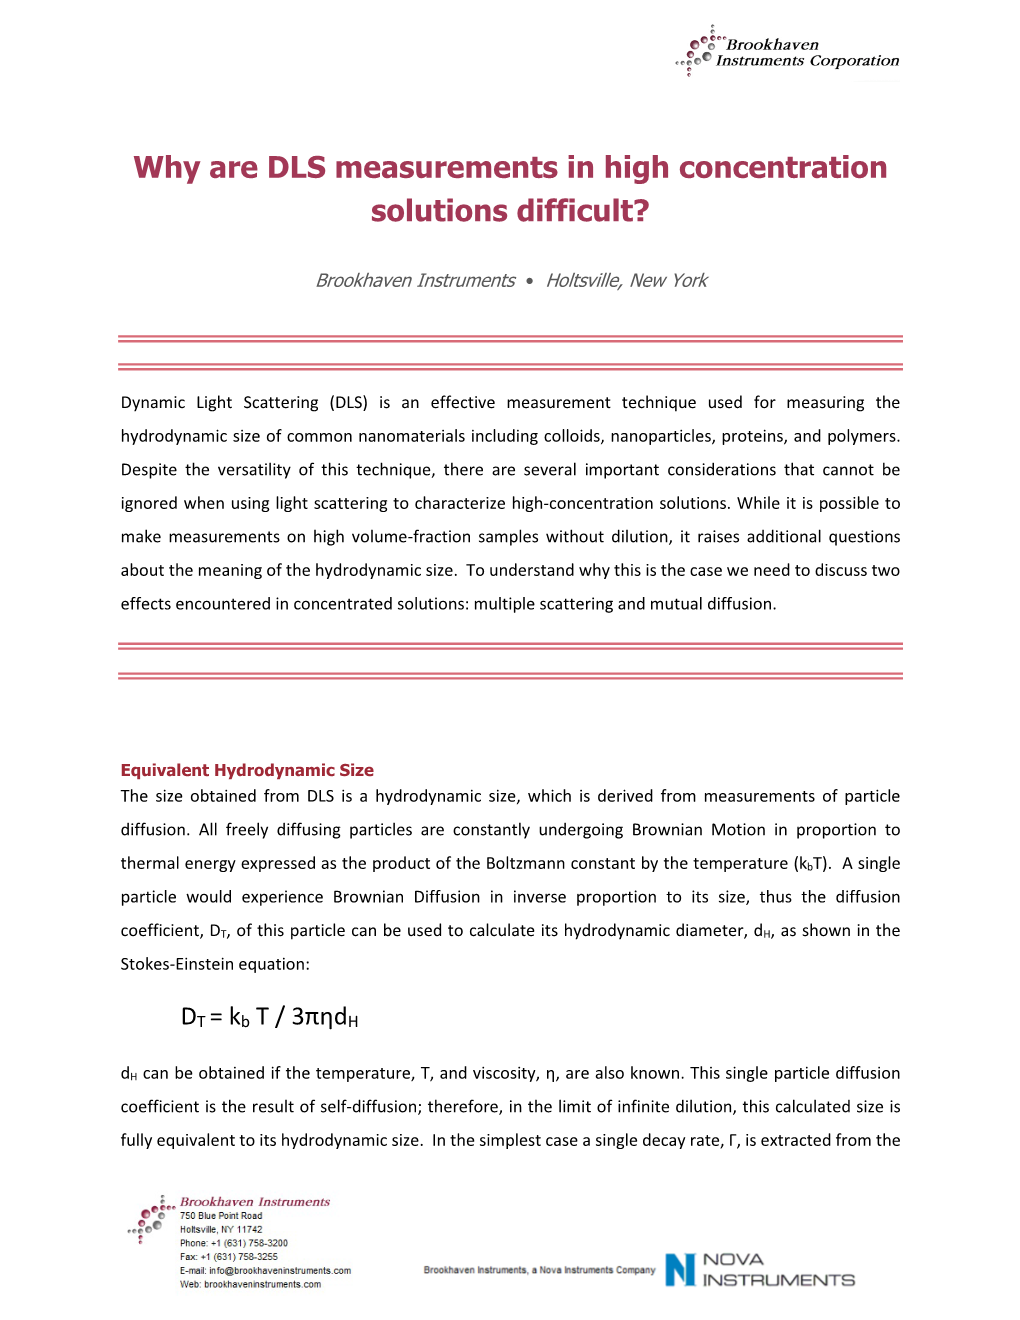 Why Are DLS Measurements in High Concentration Solutions Difficult?